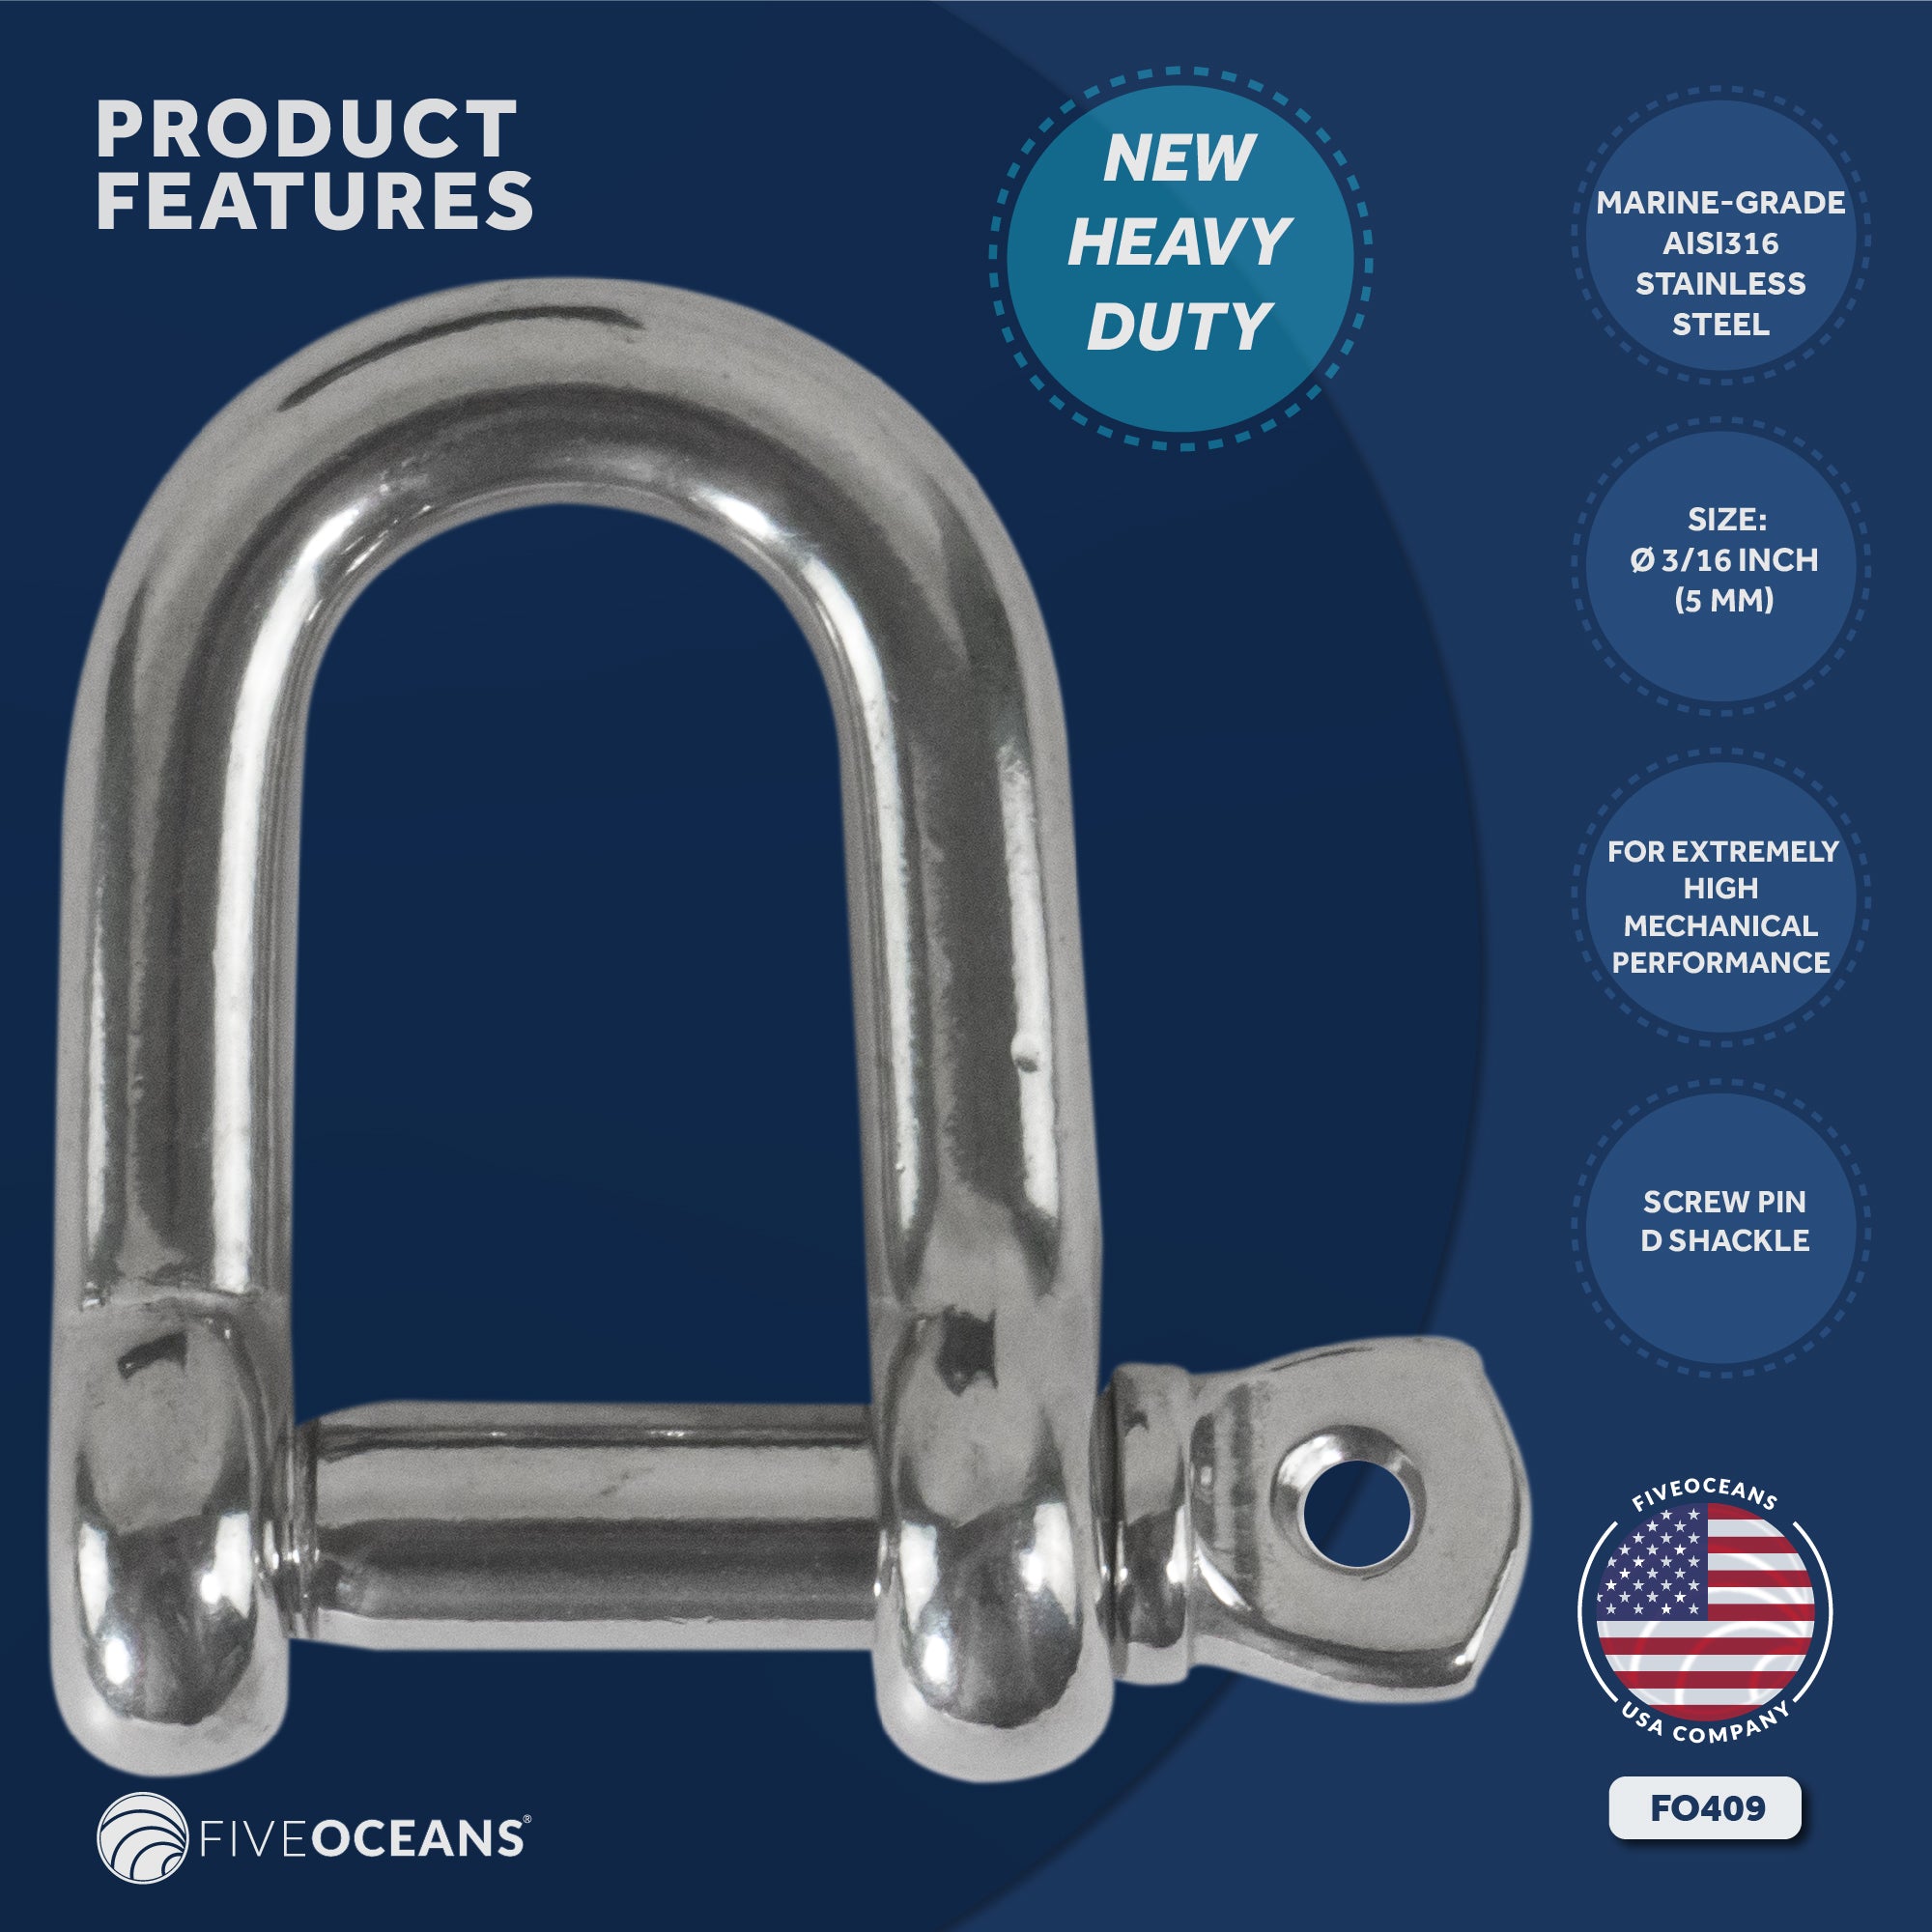 Pin D Shackles, 3/16" Screw, Stainless Steel - FO409